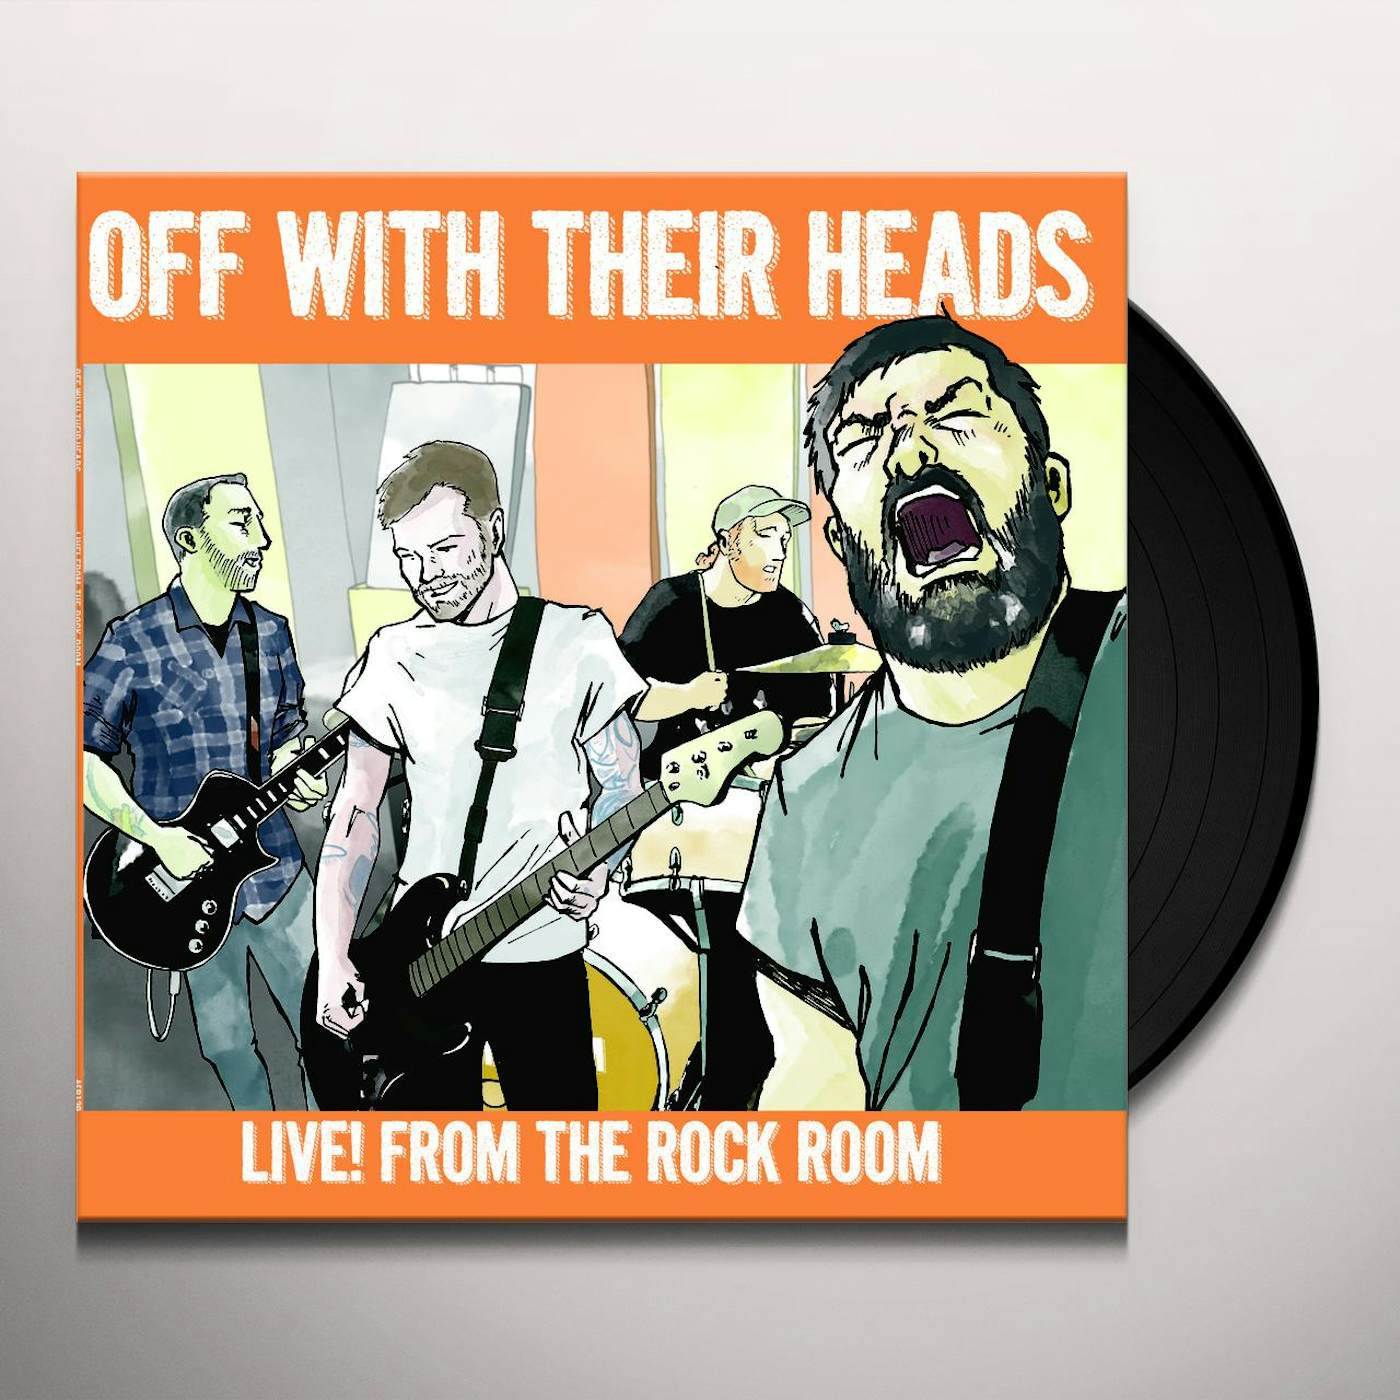 Off With Their Heads LIVE! FROM THE ROCK ROOM Vinyl Record